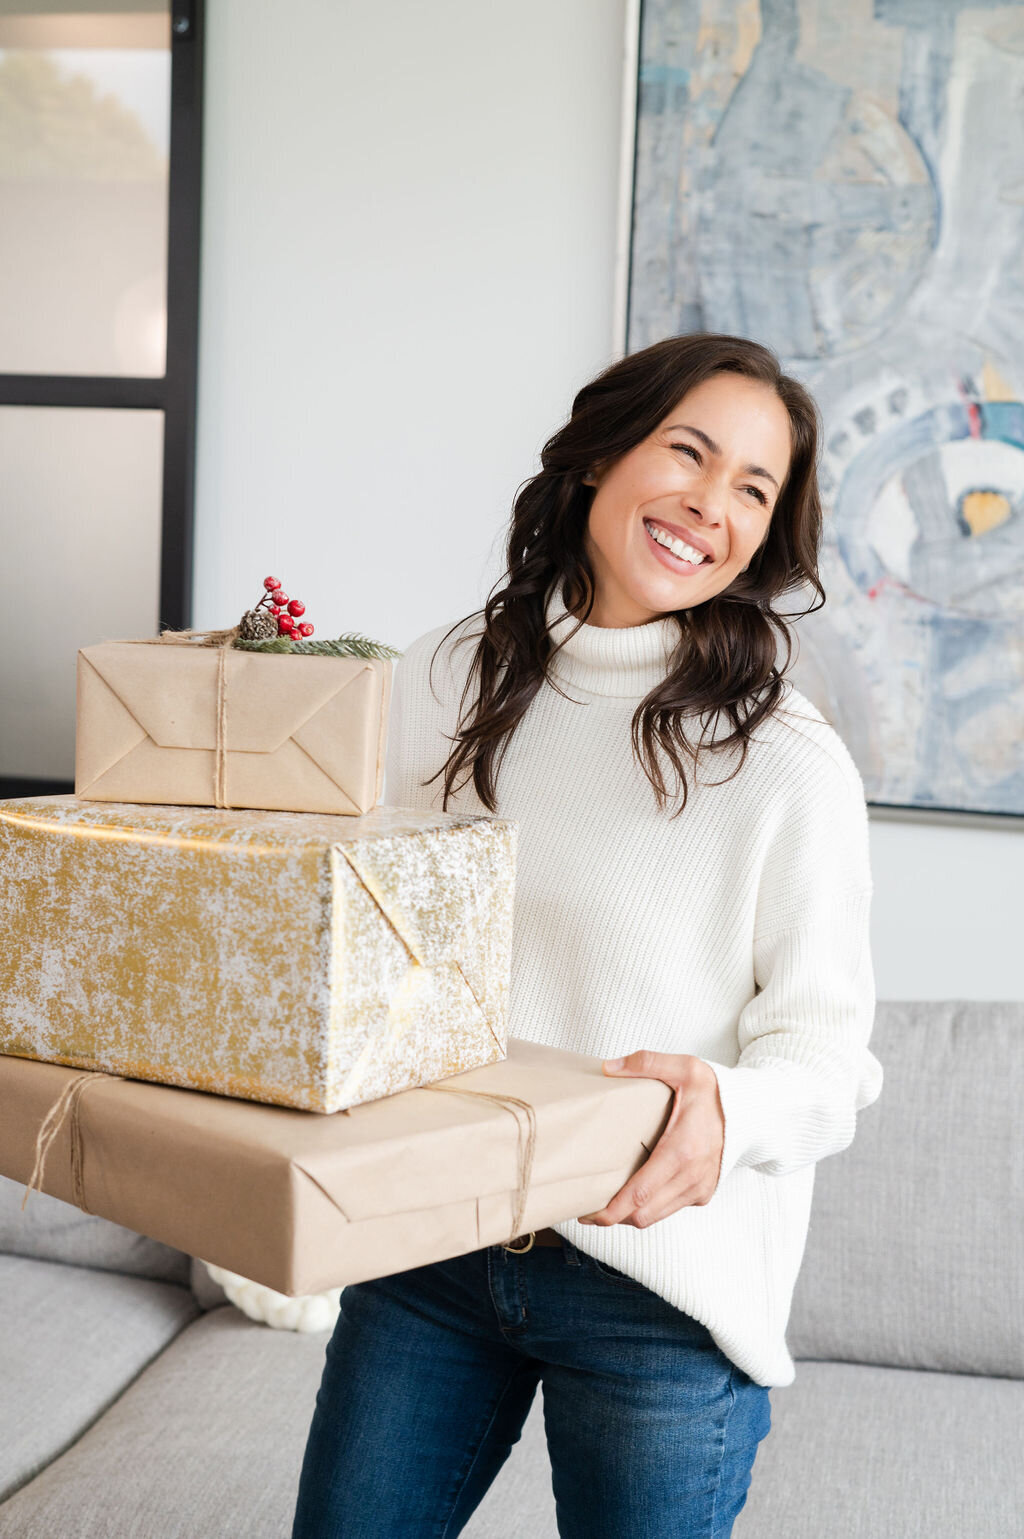 Model smiling off camera and carrying a stack of gifts